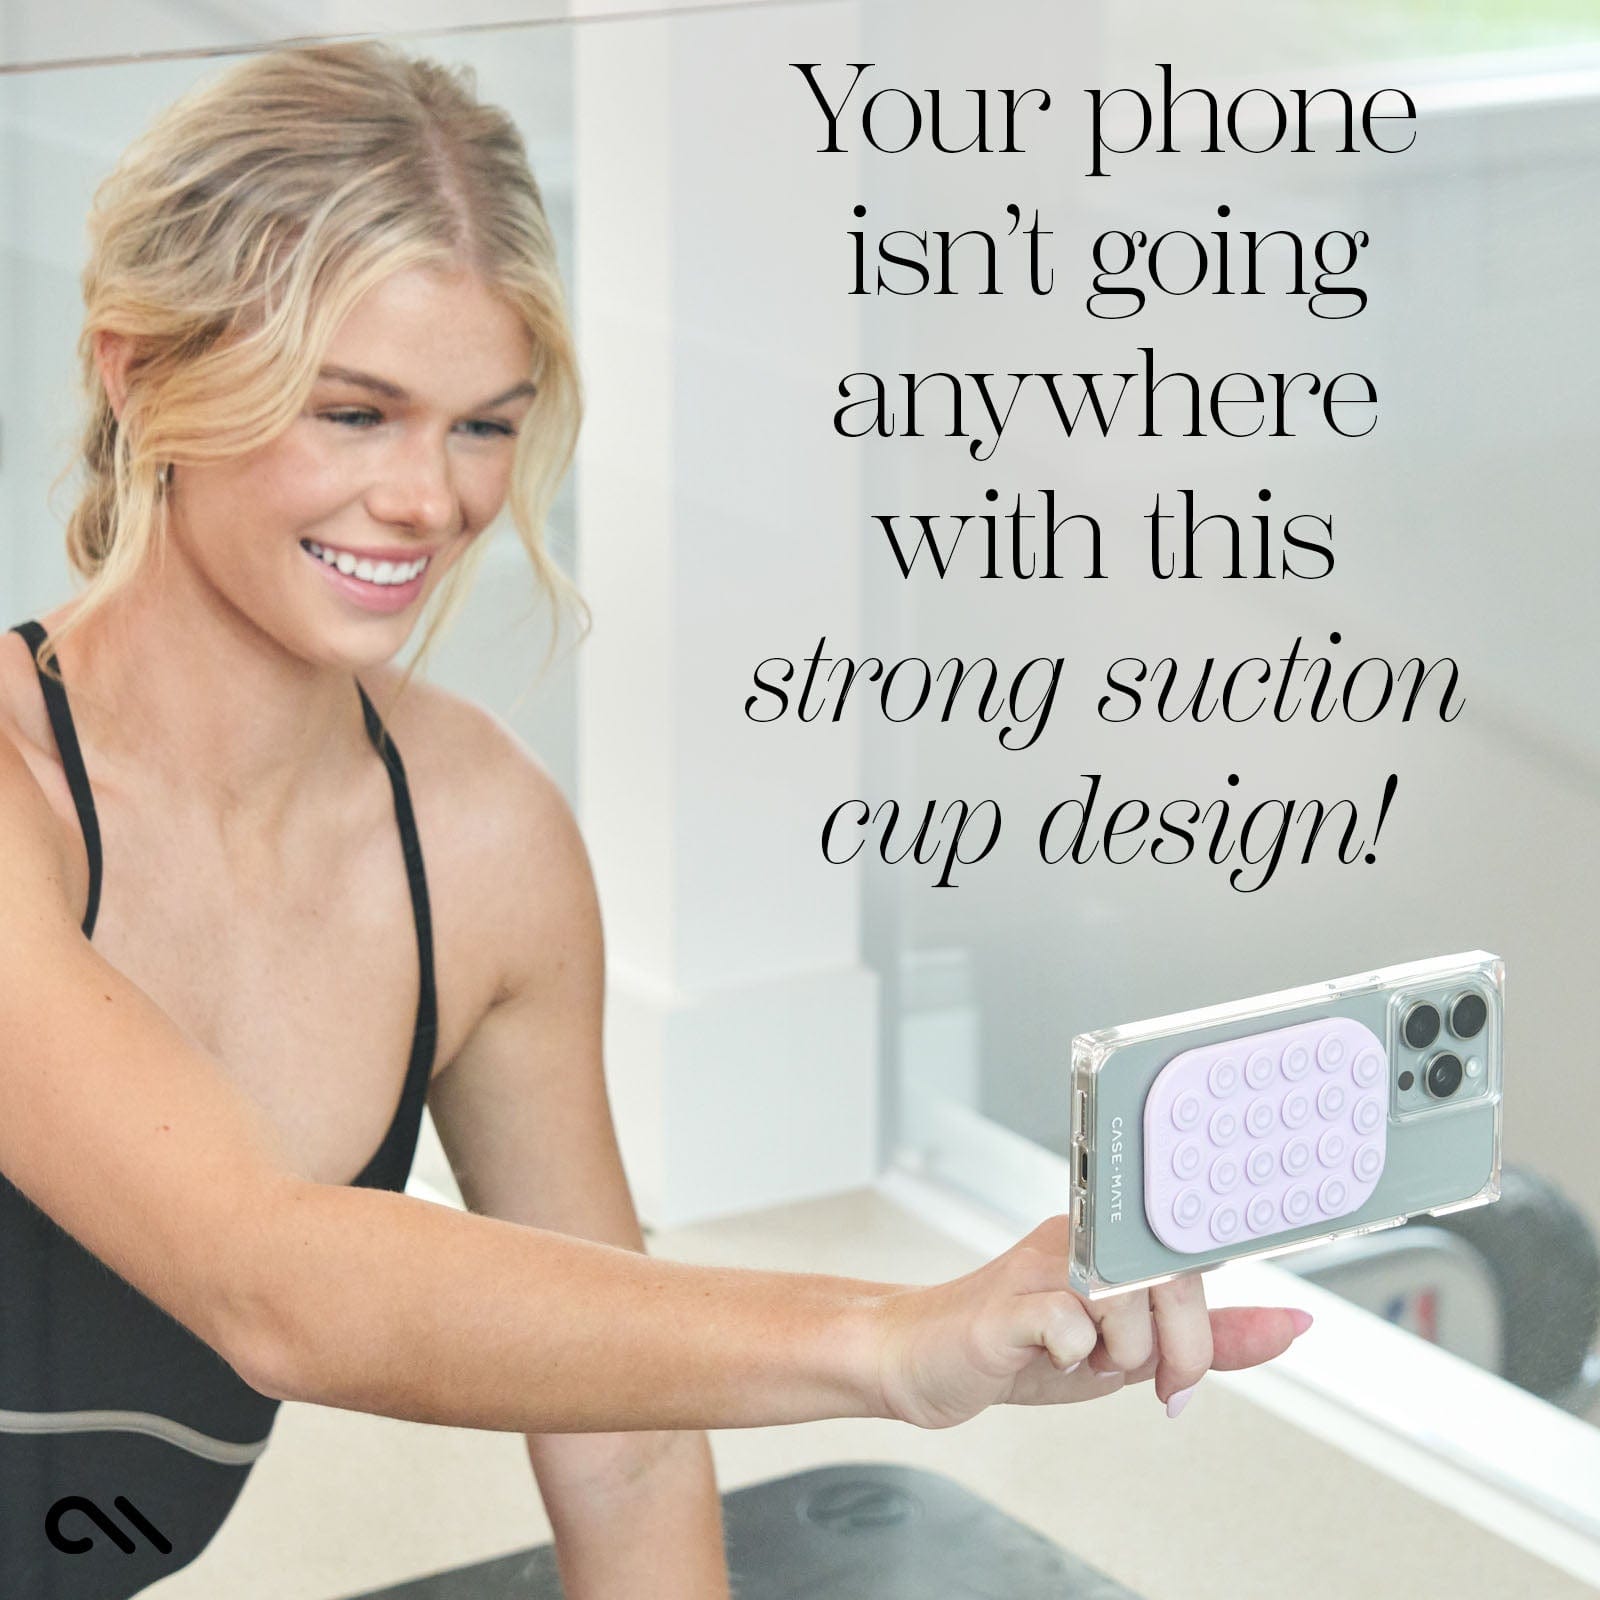 YOUR PHONE ISN'T GOING ANYWHERE WITH THIS STRONG SUCTION CUP DESIGN!